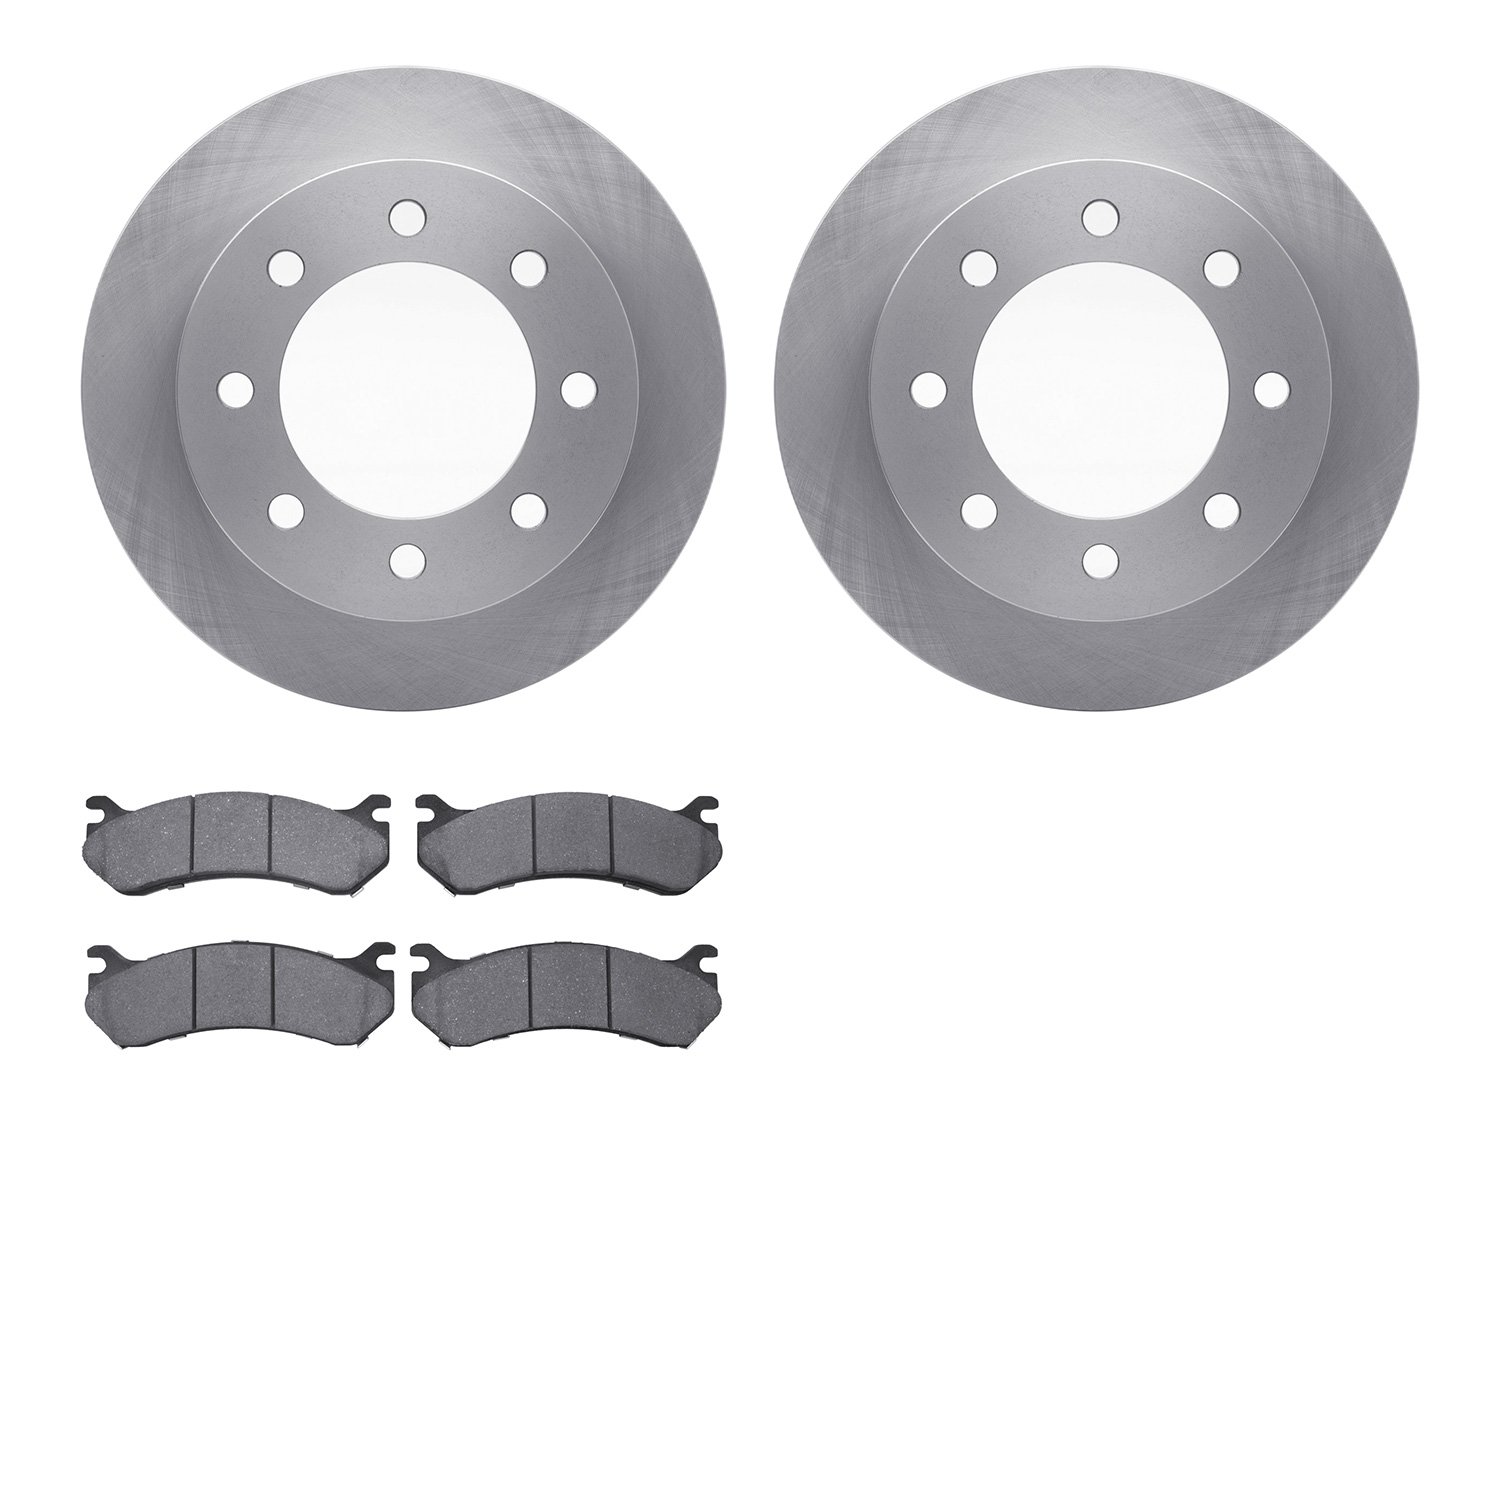 6402-48076 Brake Rotors with Ultimate-Duty Brake Pads, 1999-2013 GM, Position: Rear